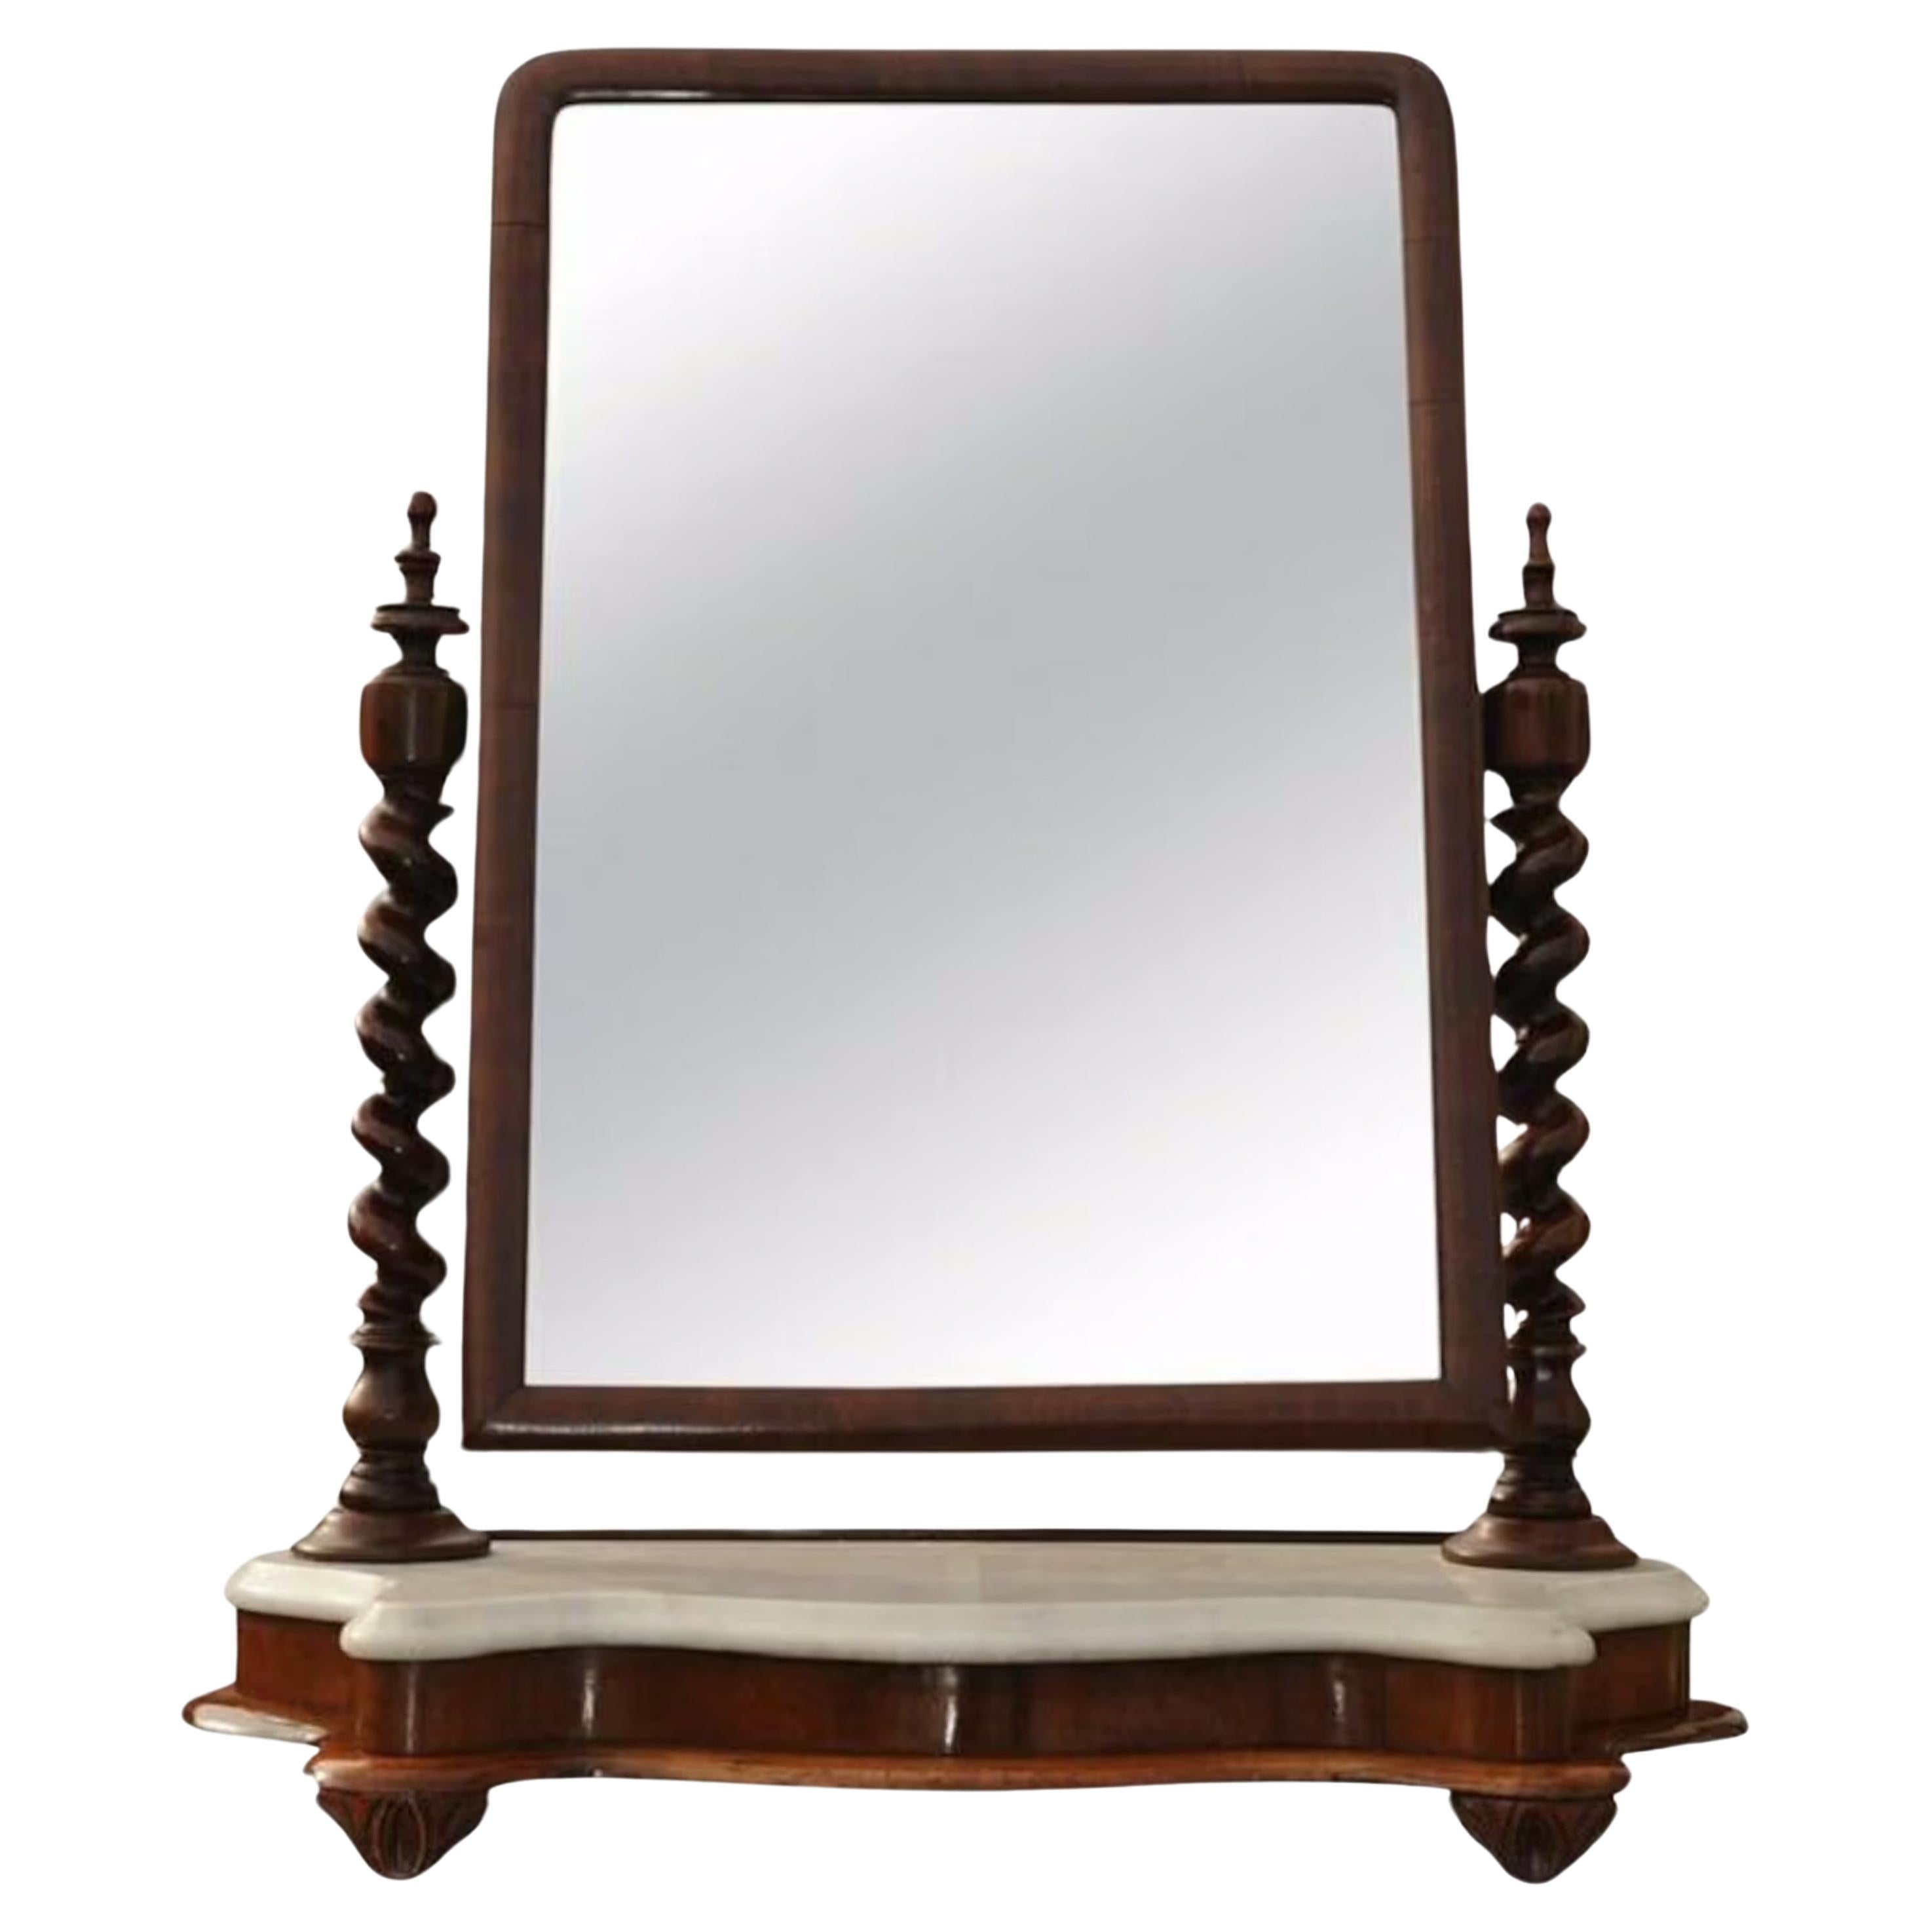 Regency Vanity Dressing Table Marble Mahogany Mirror with Barley Twist Supports.